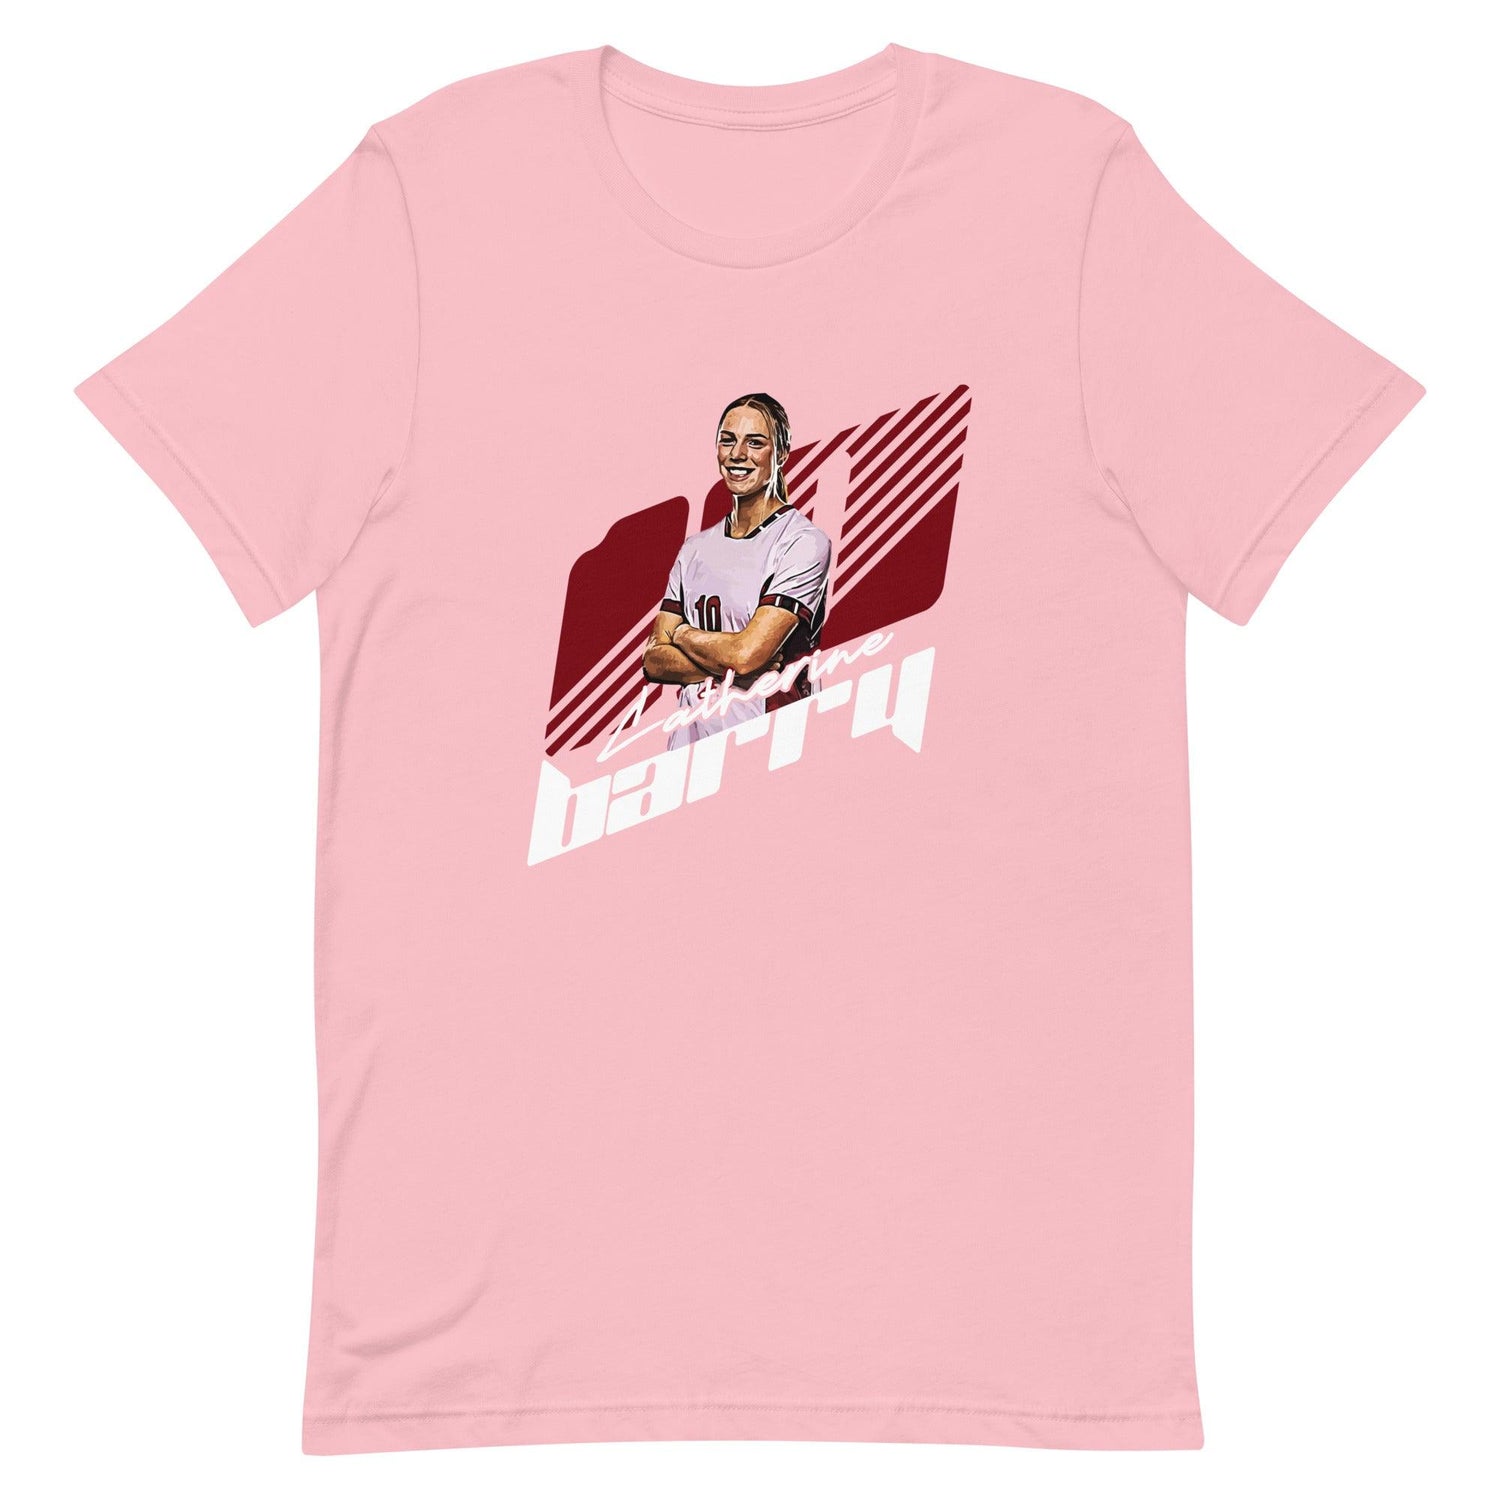 Catherine Barry "Gameday" t-shirt - Fan Arch